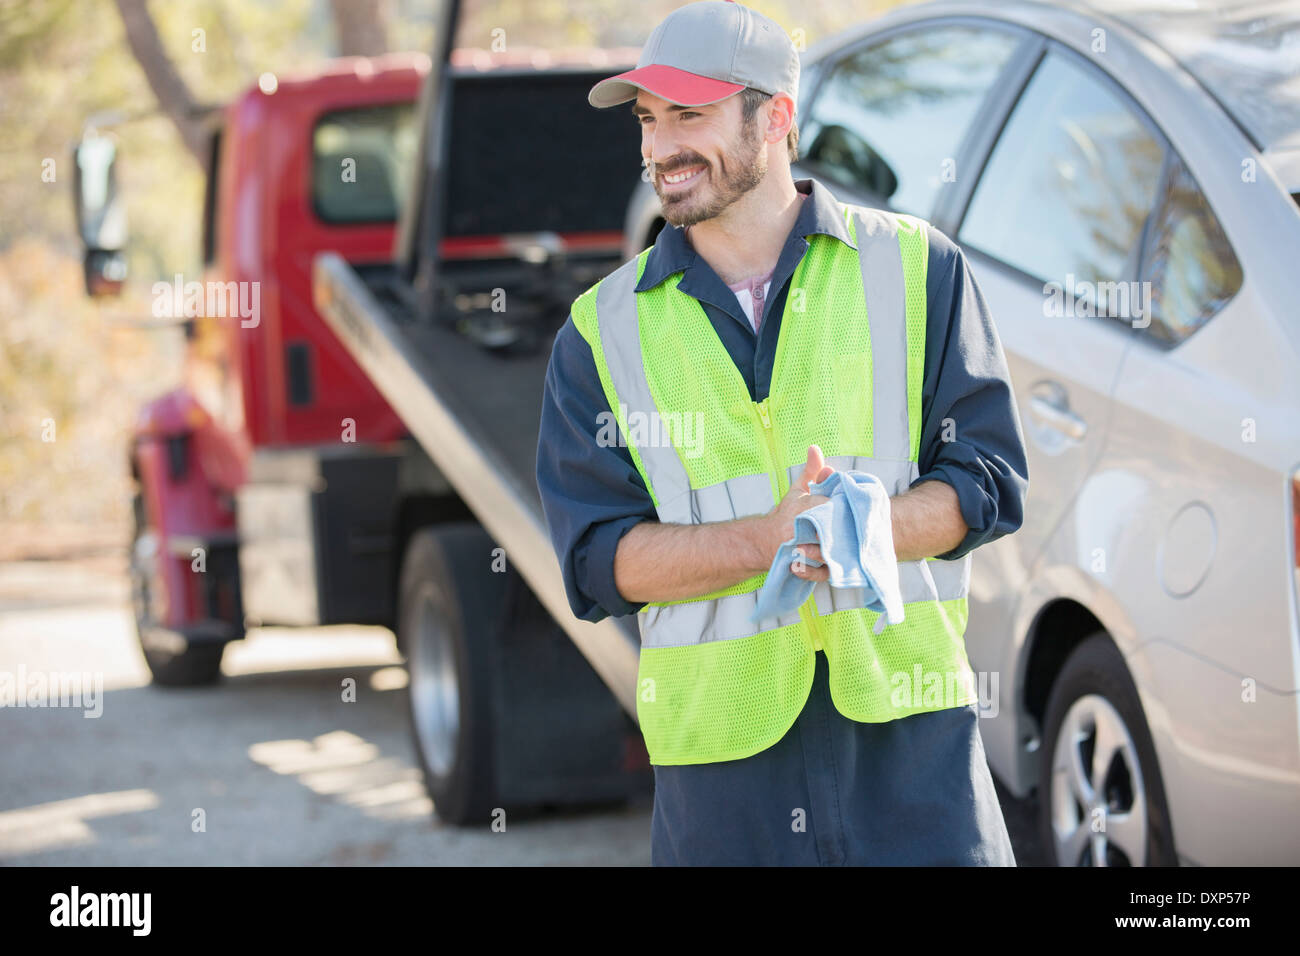 Roadside mechanic wiping hands with cloth next to tow truck Stock Photo